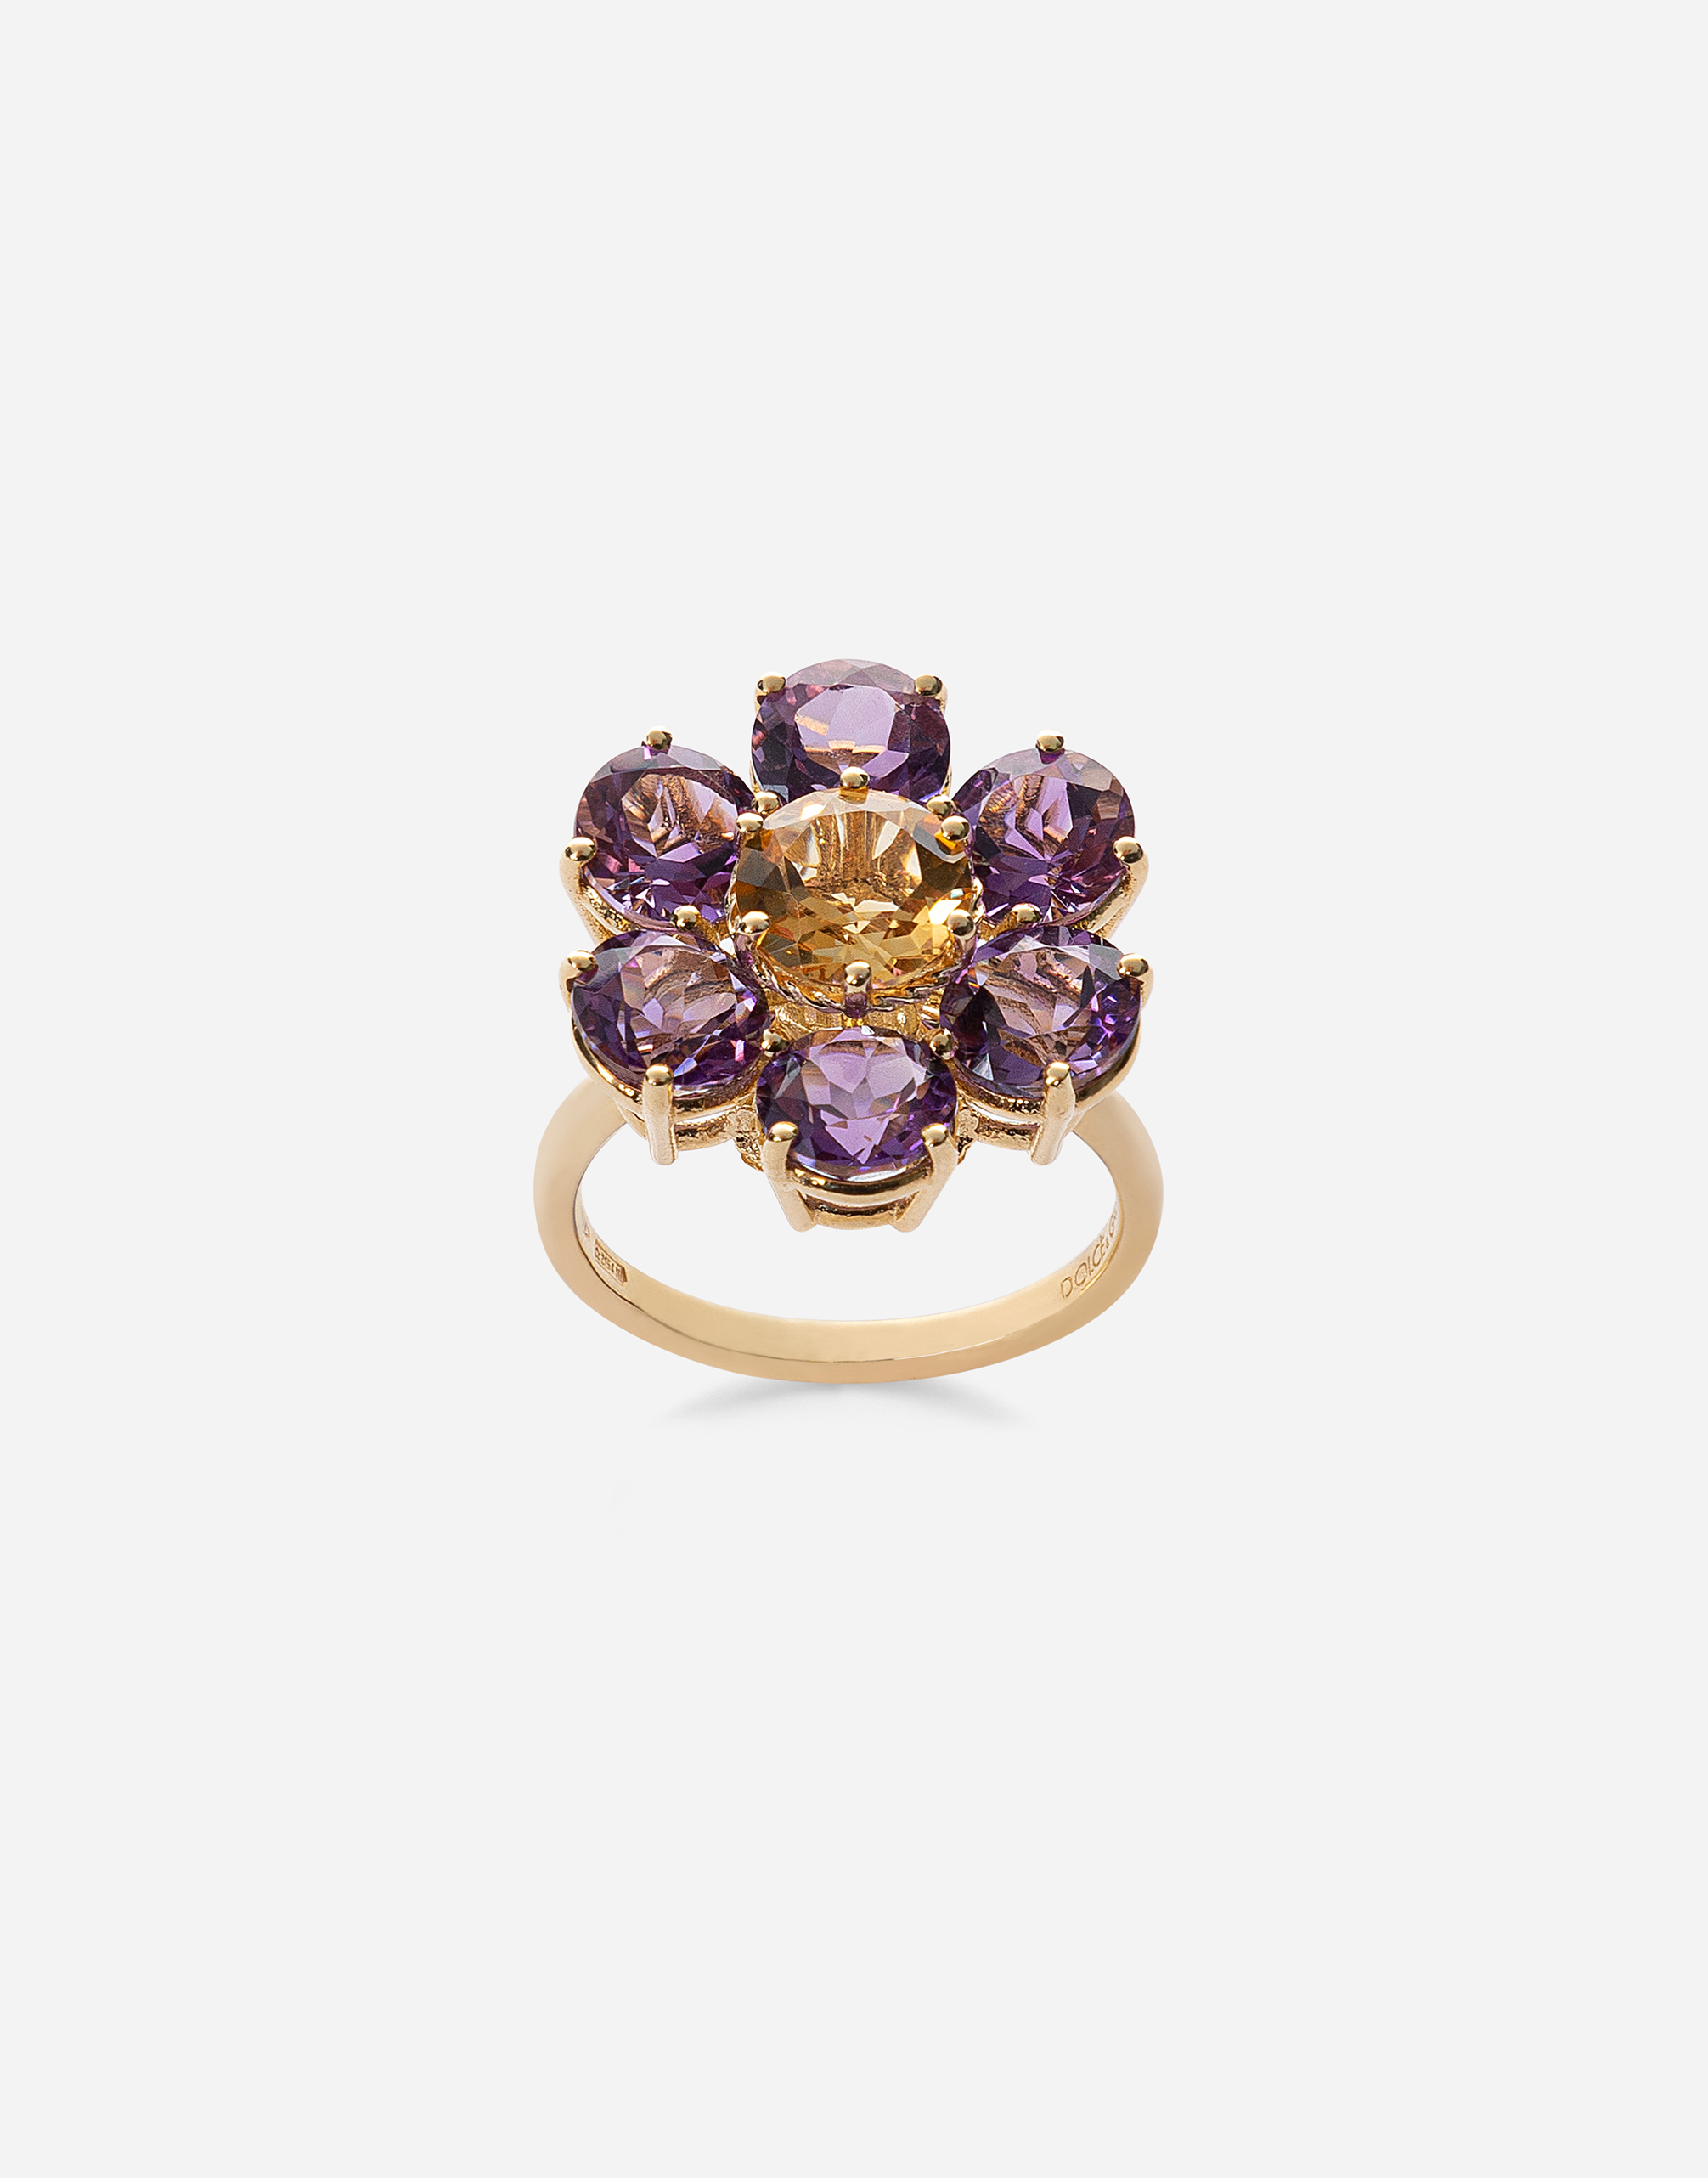 Spring ring in yellow 18kt gold with amethyst floral motif in Gold